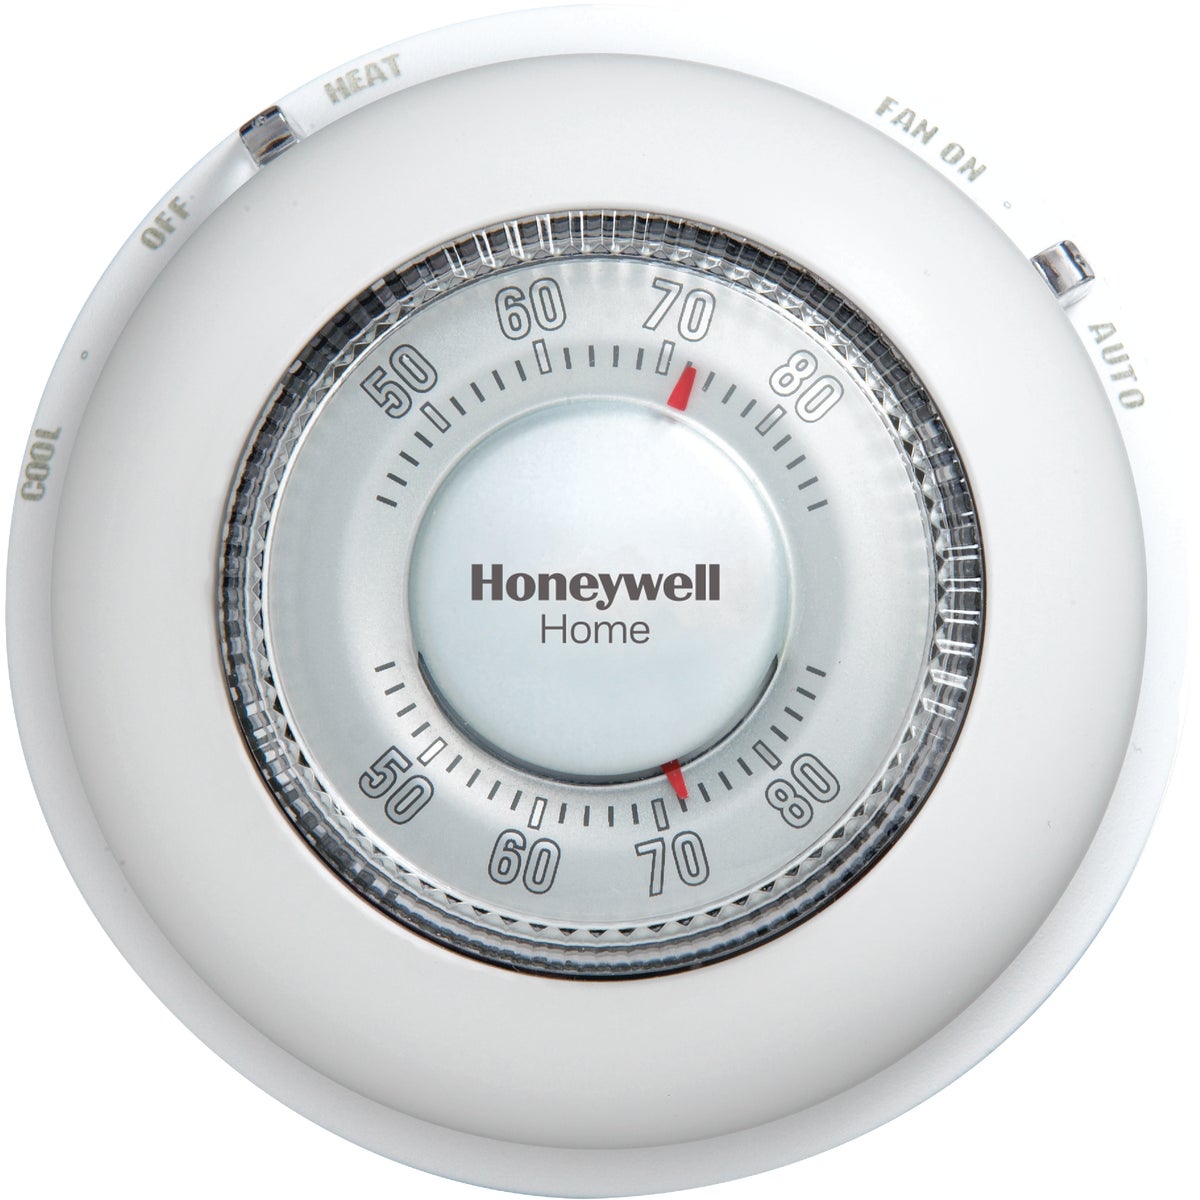 Honeywell Home Heat or Cool Off White Round Wall Thermostat